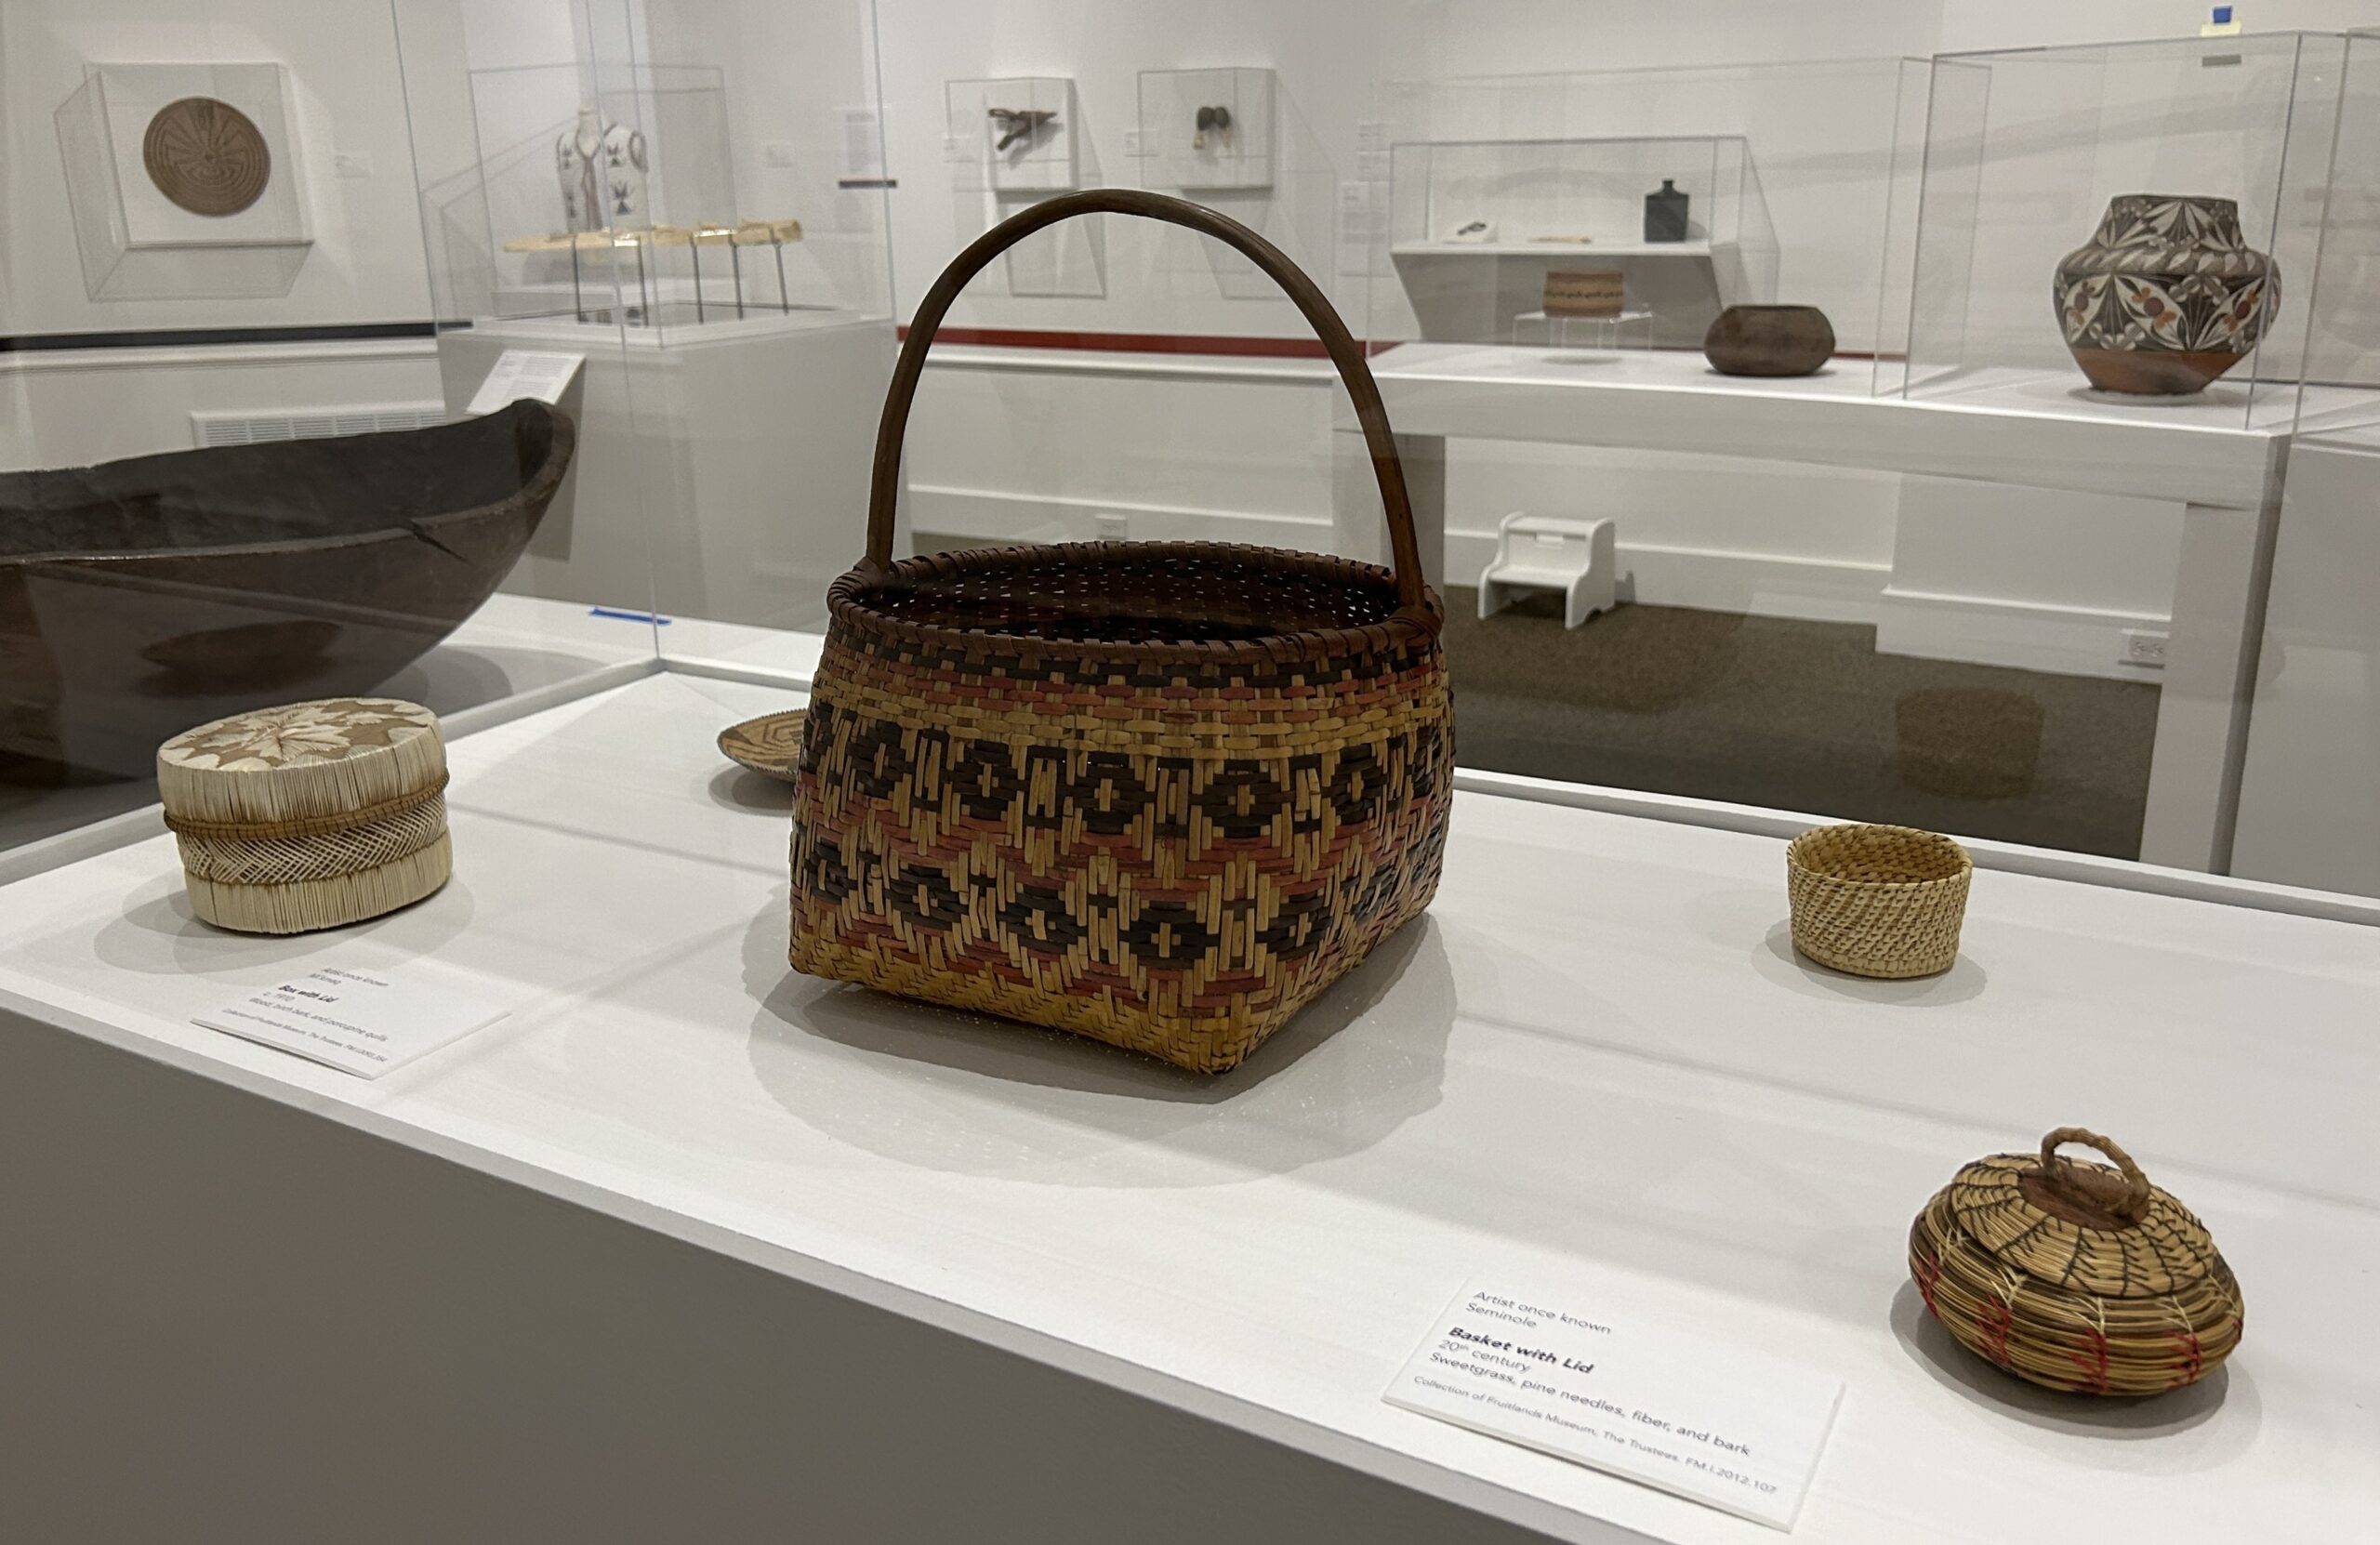 Basketry items are displayed in the 